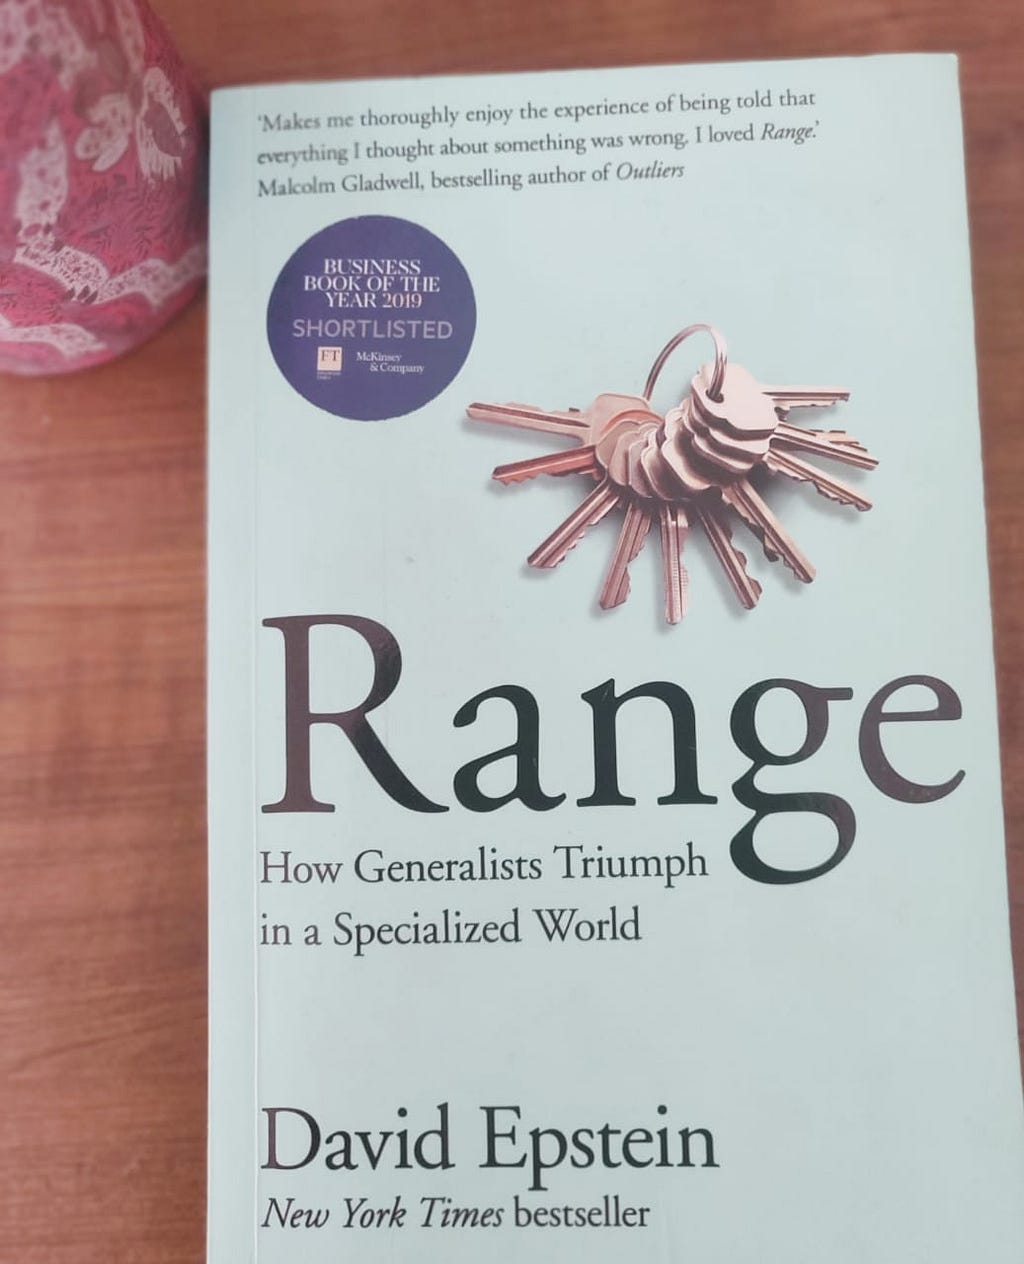 Range:How Generalists Triumph in a Specialized Woeld